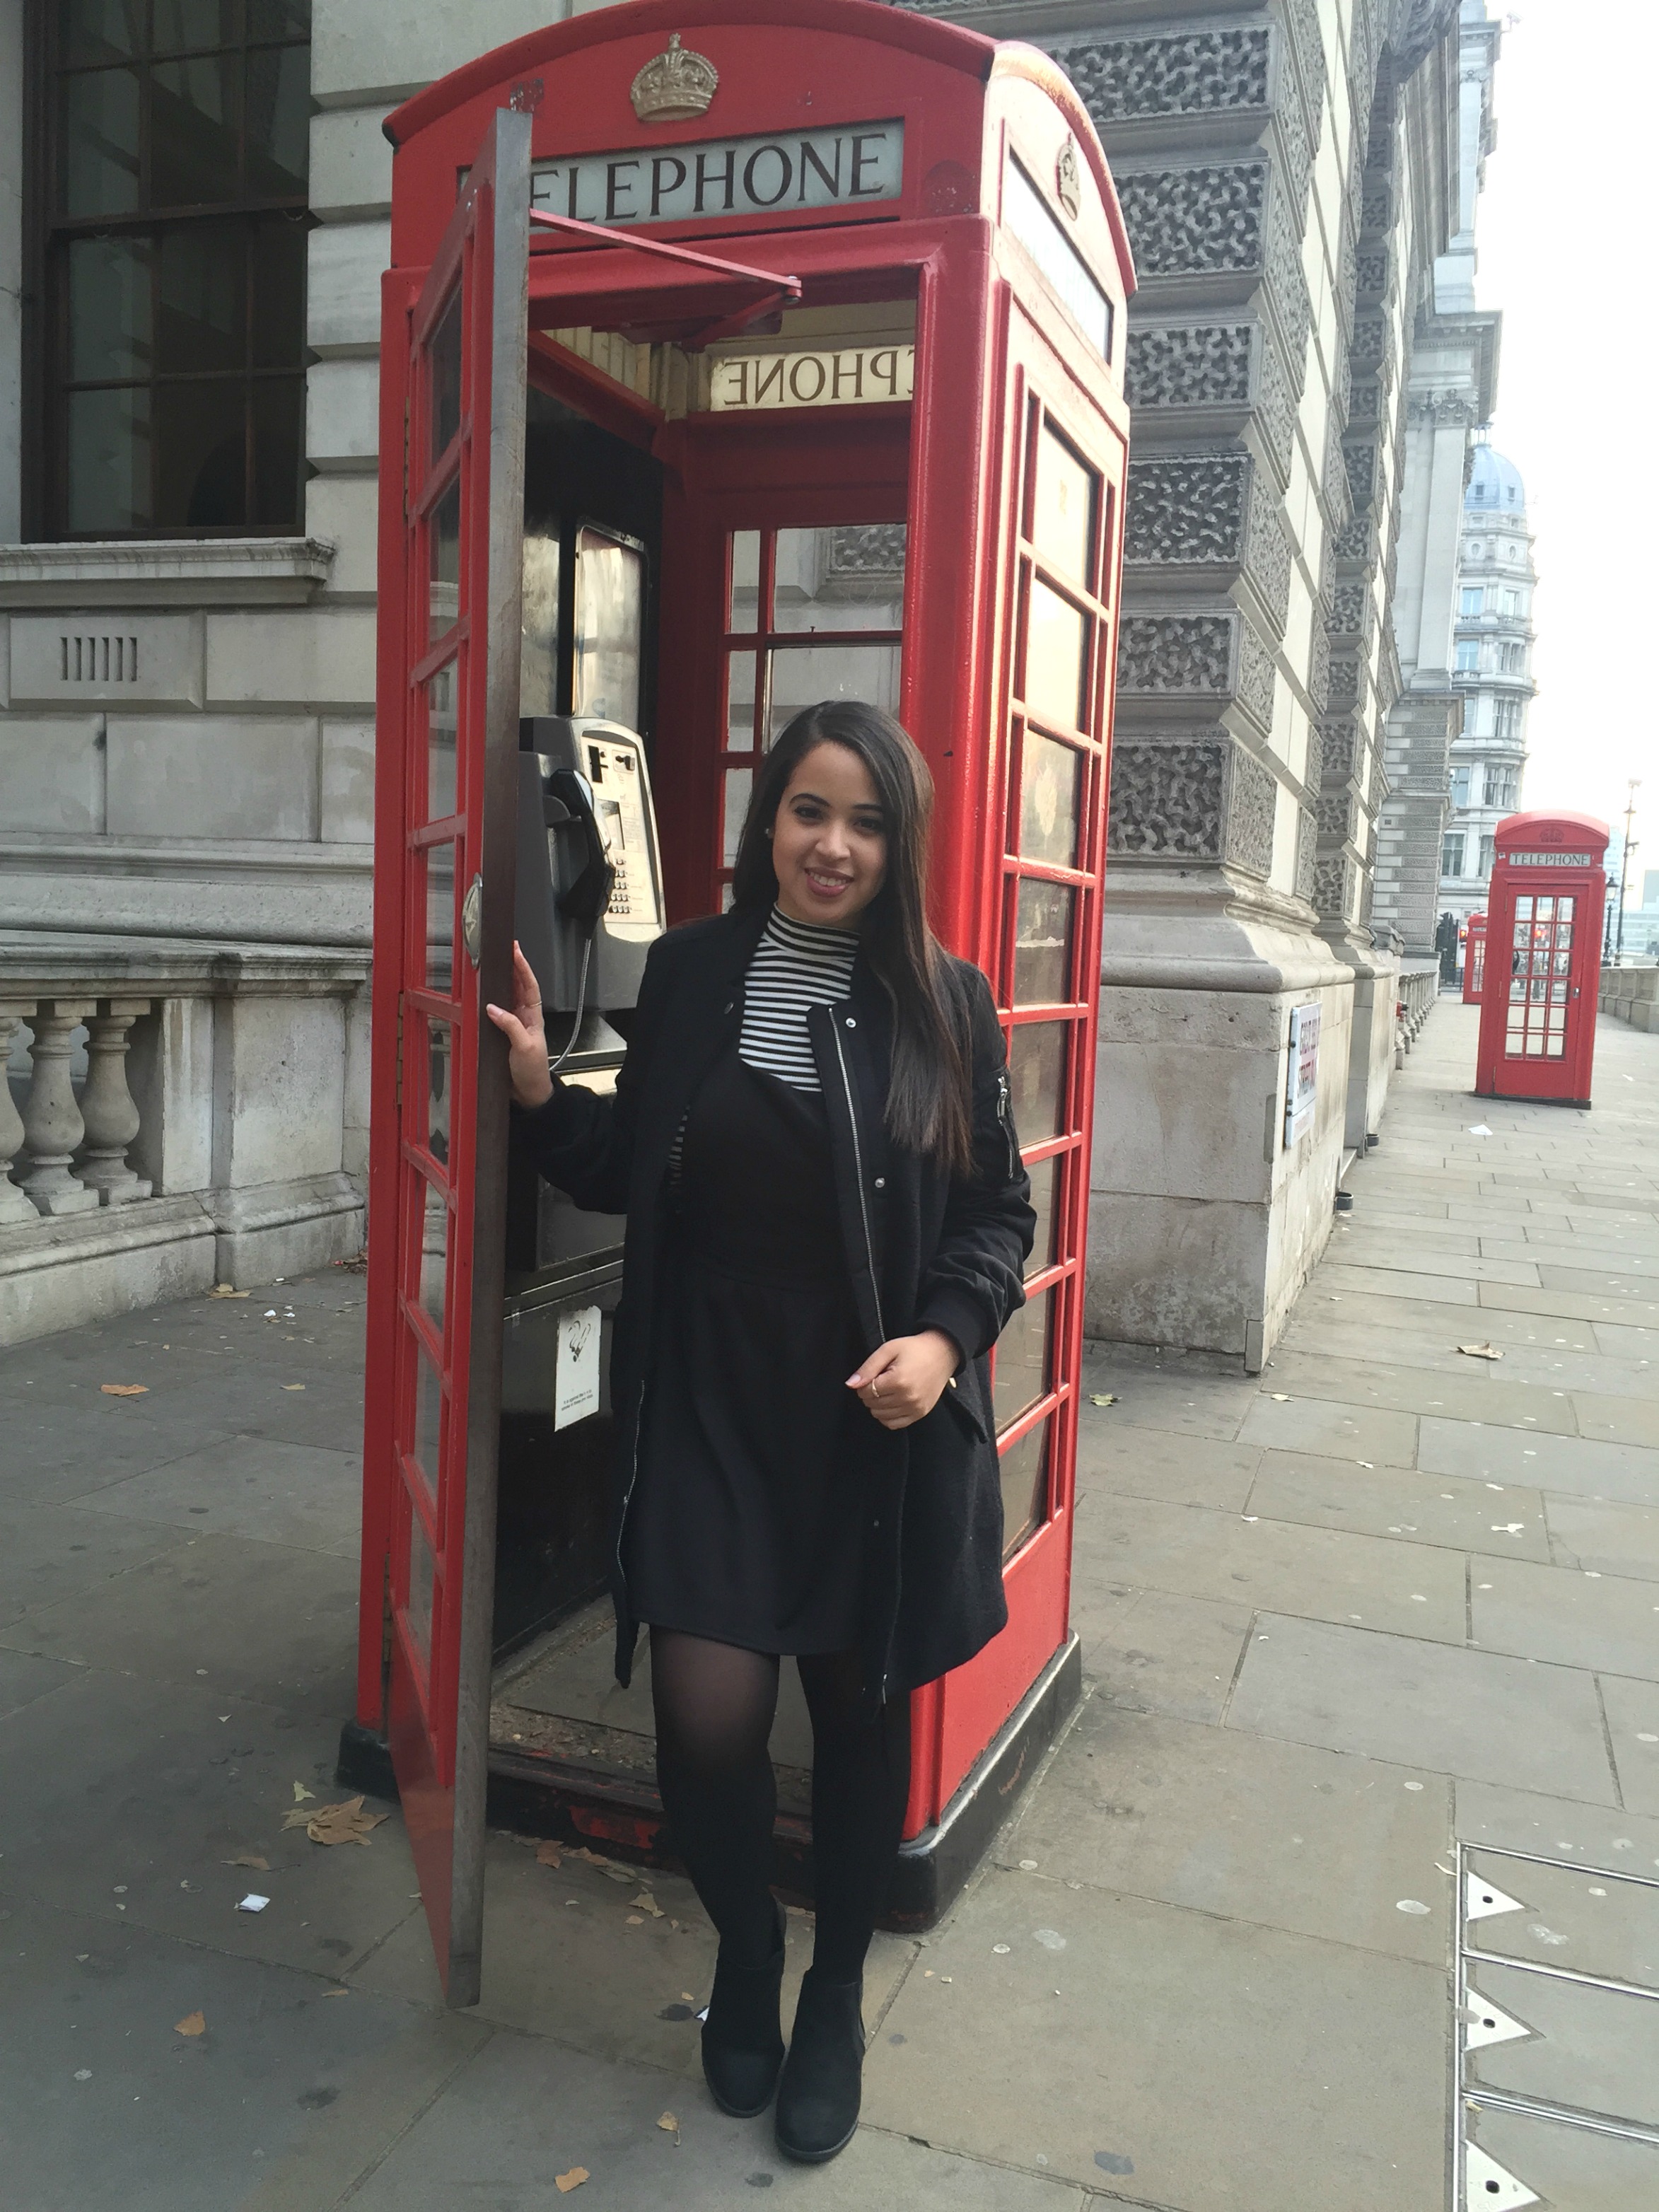 London Travel Diary red telephone booth